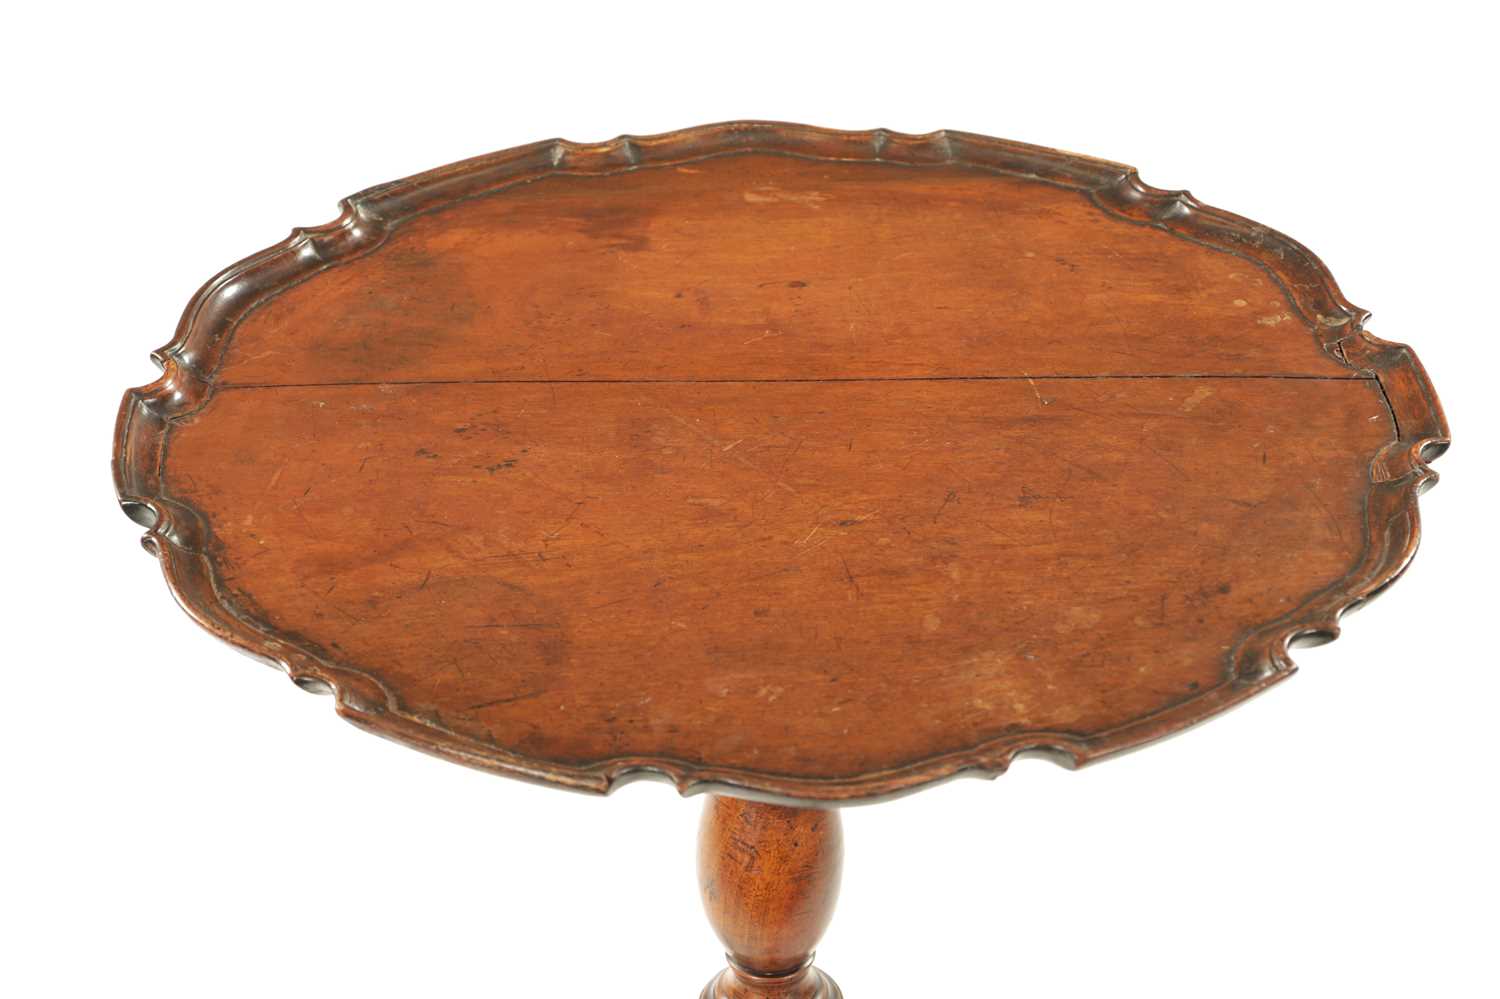 AN 18TH CENTURY COUNTRY MADE MAHOGANY TILT TOP TRIPOD TABLE - Image 8 of 9